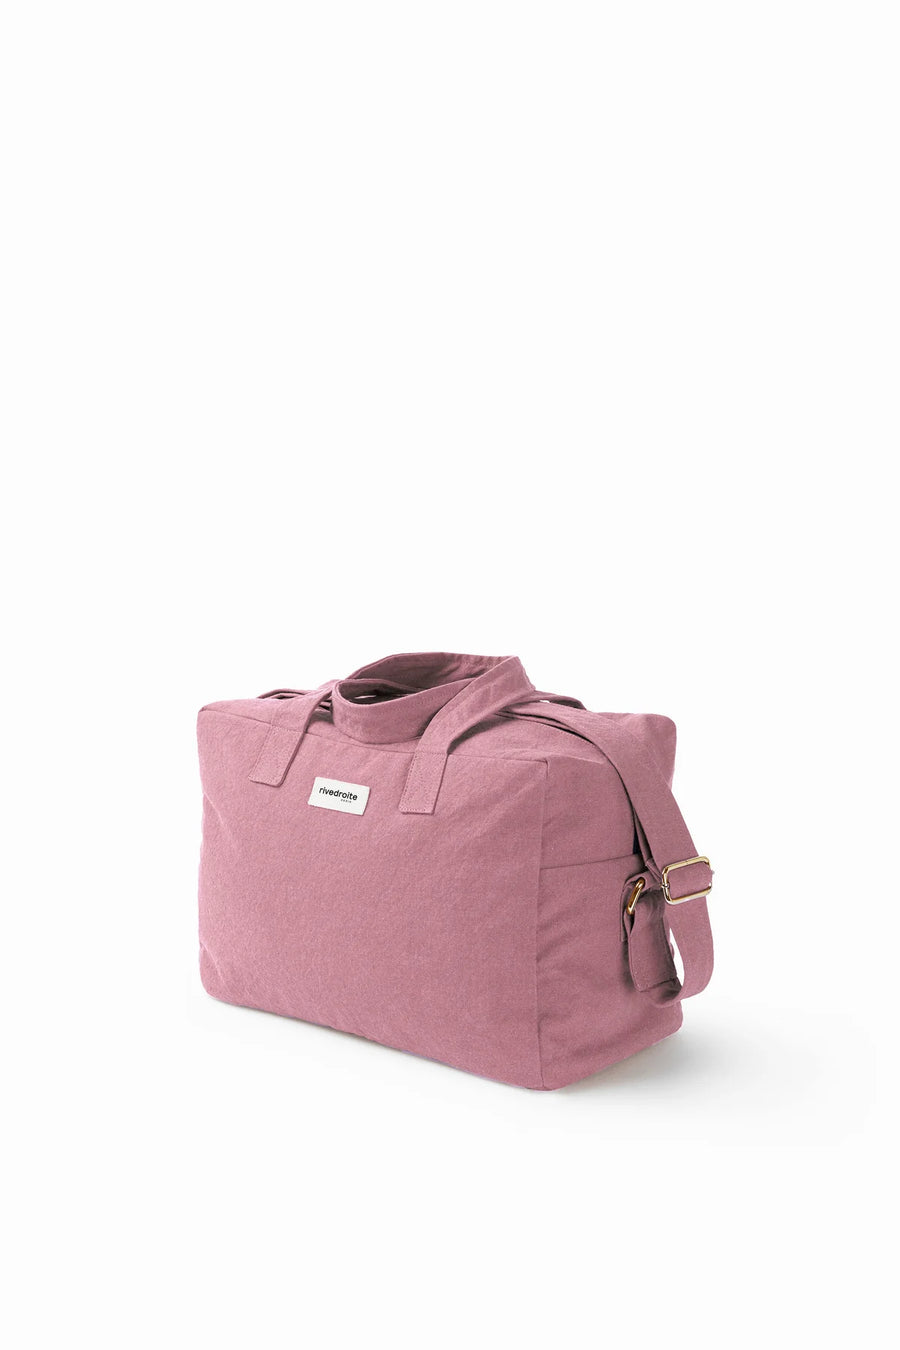 Sauval - The City Bag Recycled cotton 